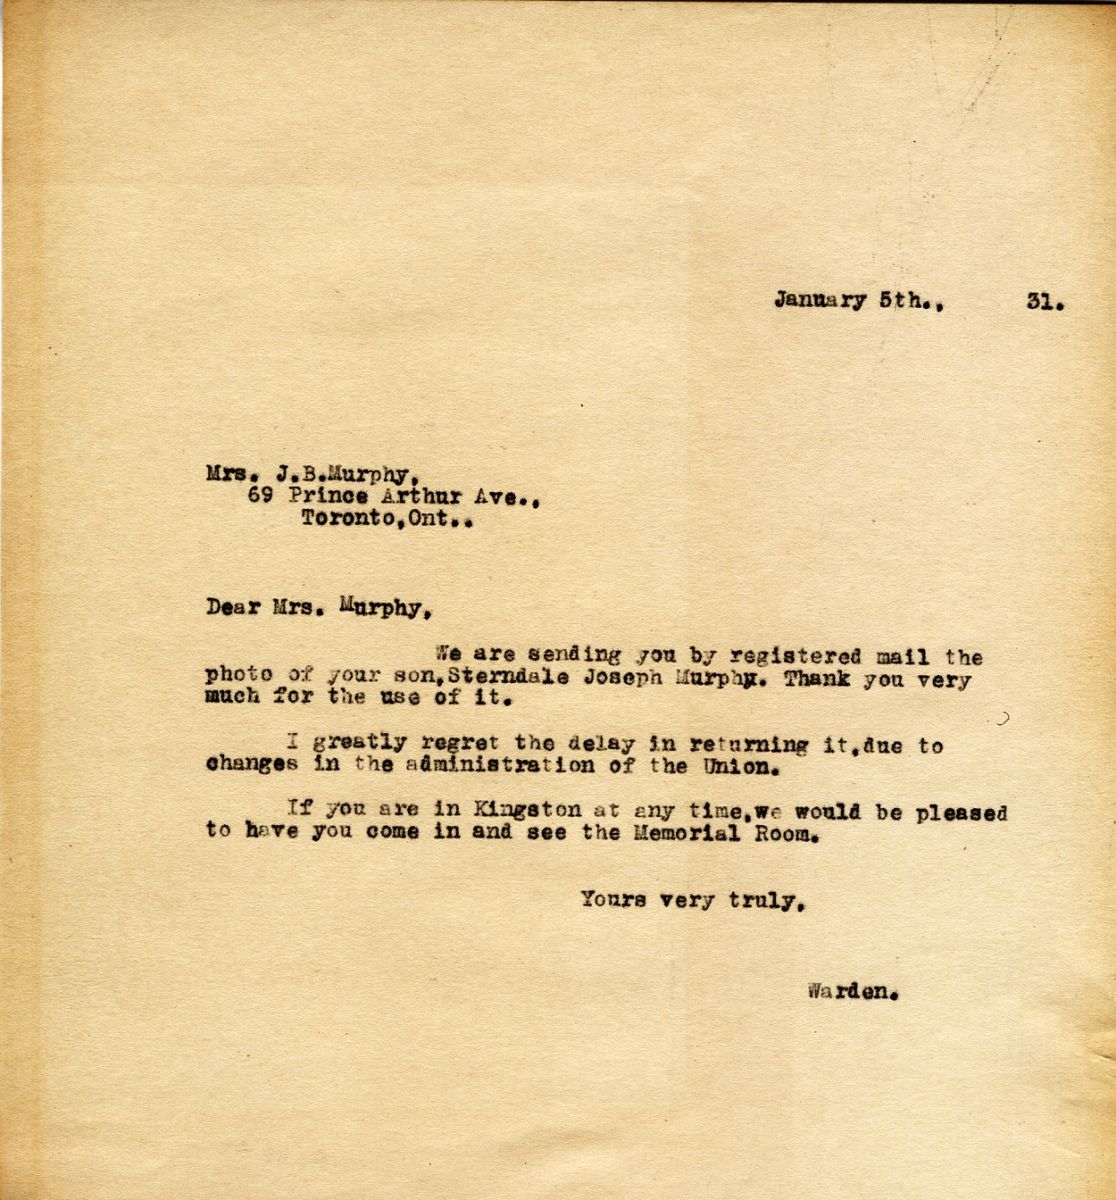 Letter from the Warden to Mrs. J.B. Murphy, 5th January 1931